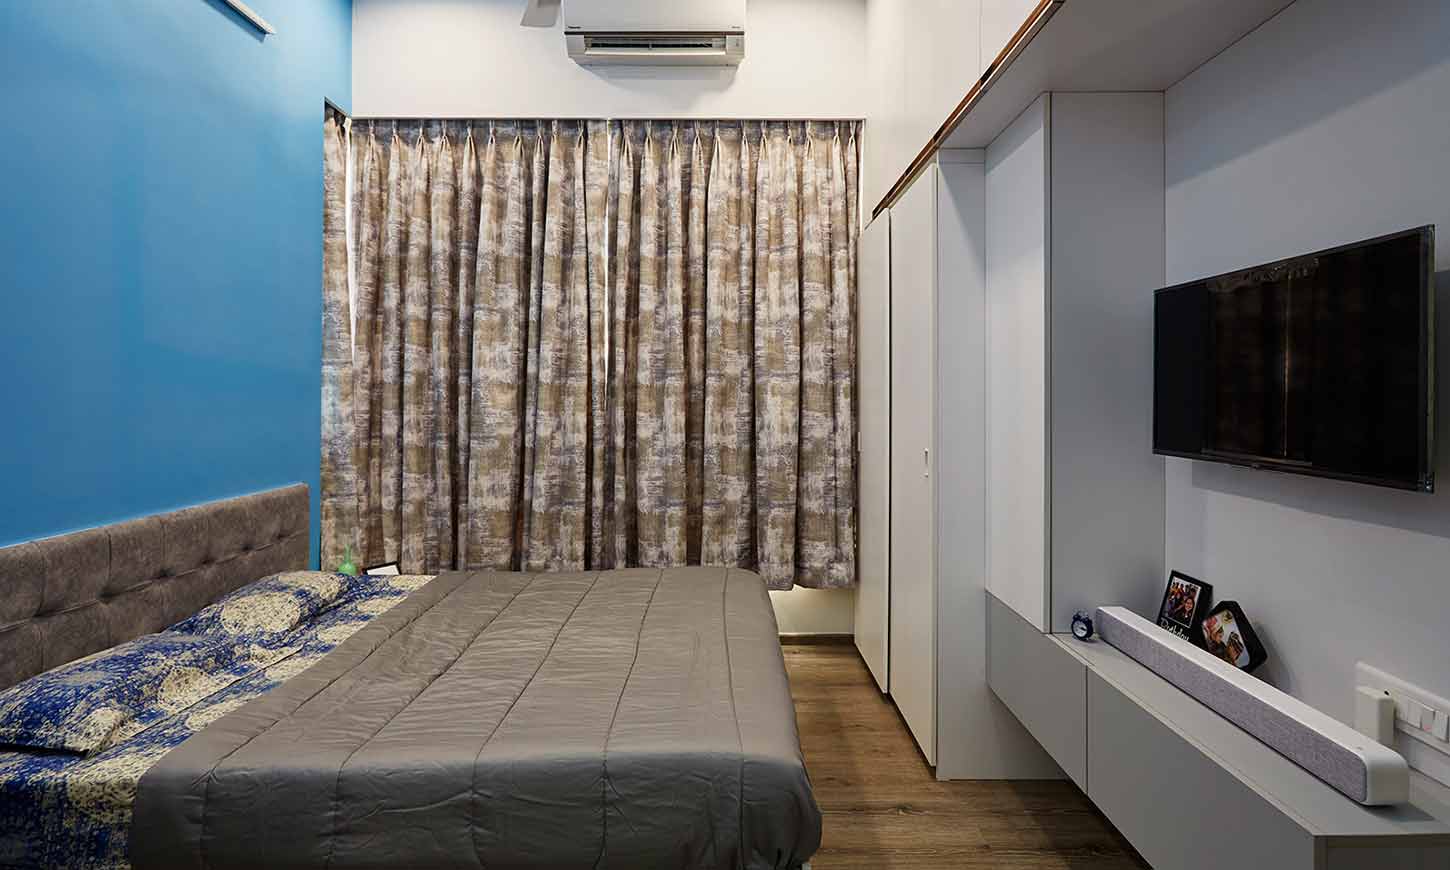 Bedroom designer in mumbai with wall mounted bedroom cupboards and a tv unit